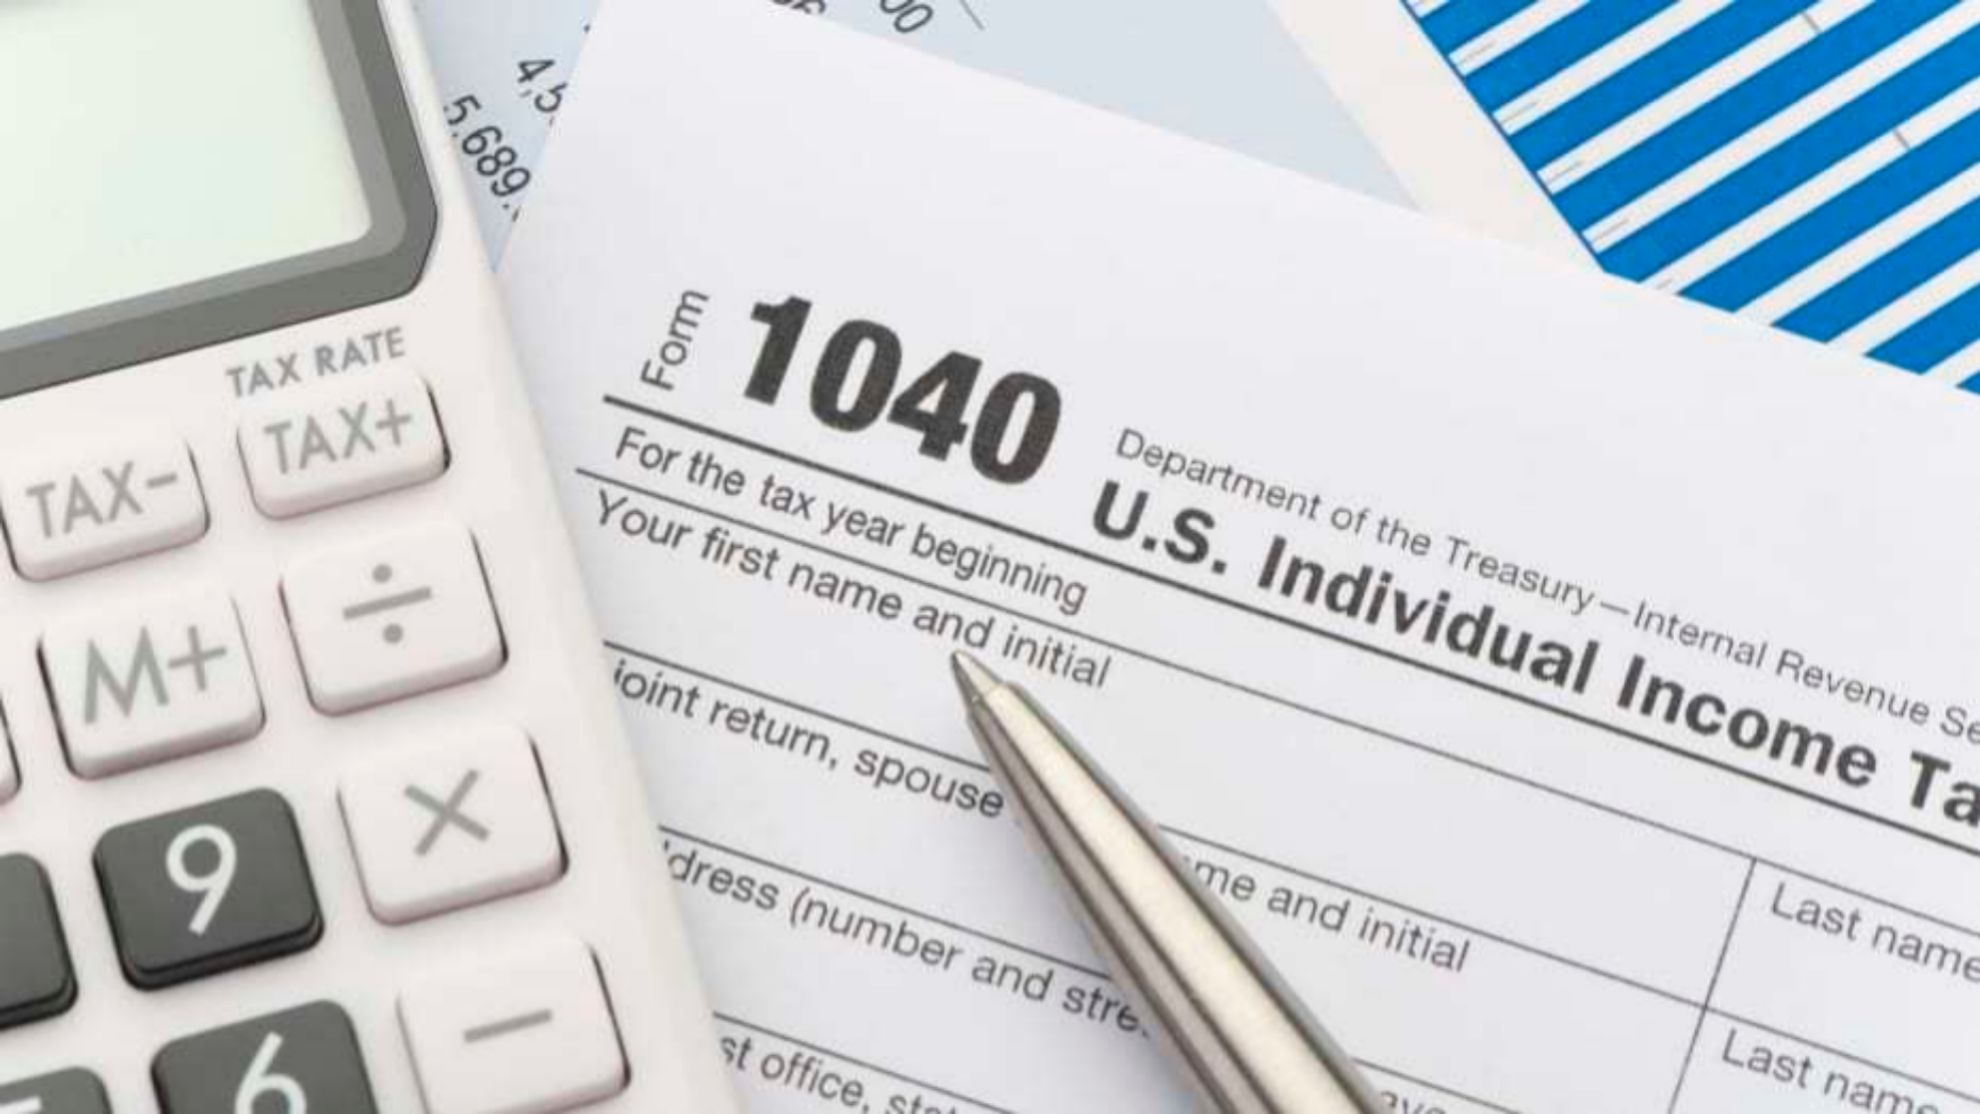 Irs 2022 Schedule 5 Tax Filing Season 2022: What To Do Before January 24 | Marca